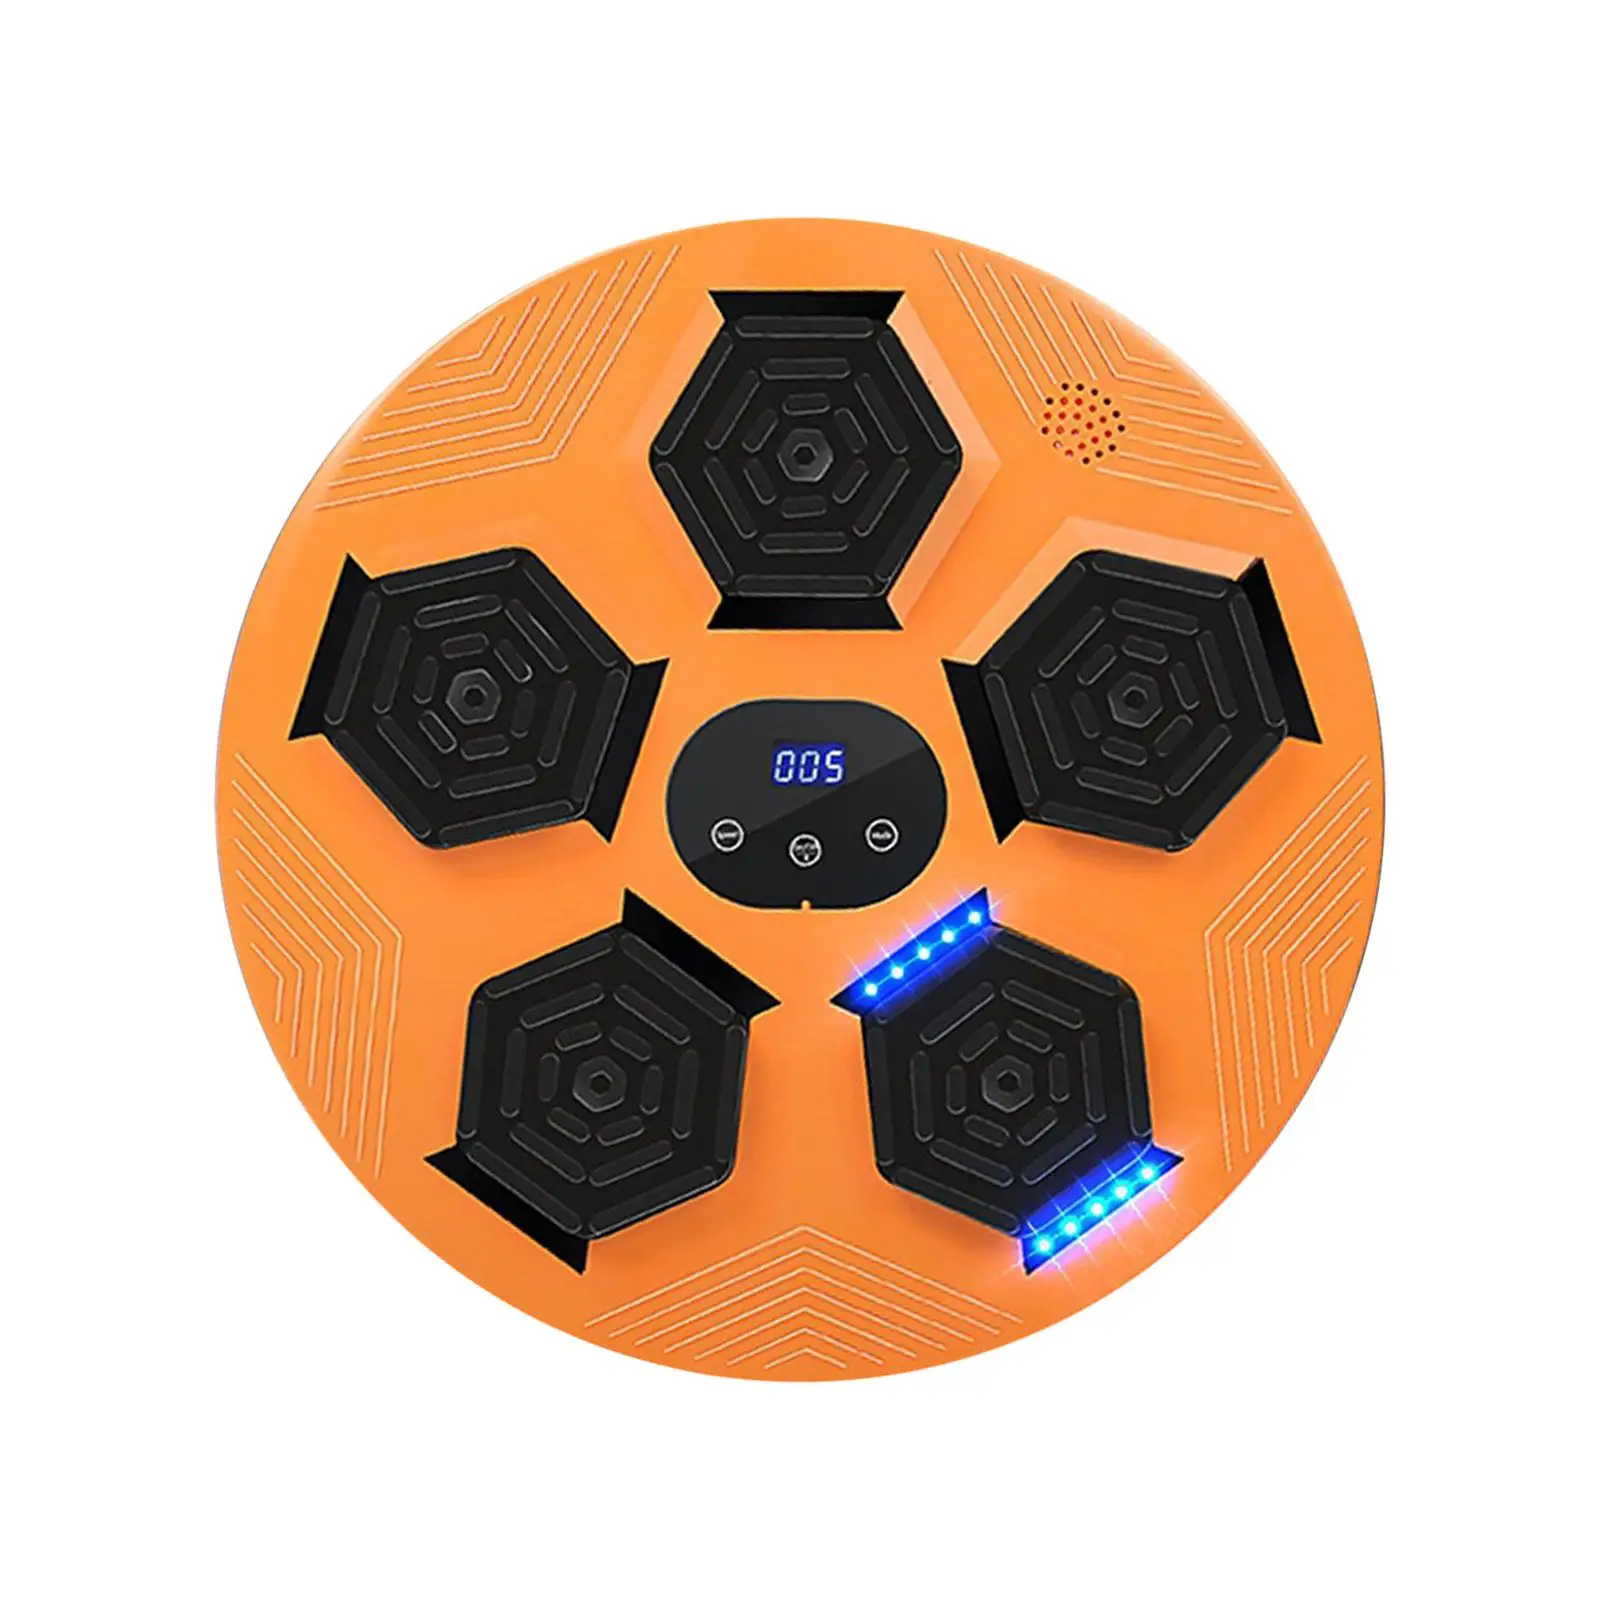 Boxing Machine RGB Light Real Time Display Multiple Modes Wall Mounted Boxing Trainer Practice Household Home Rhythm Wall Target